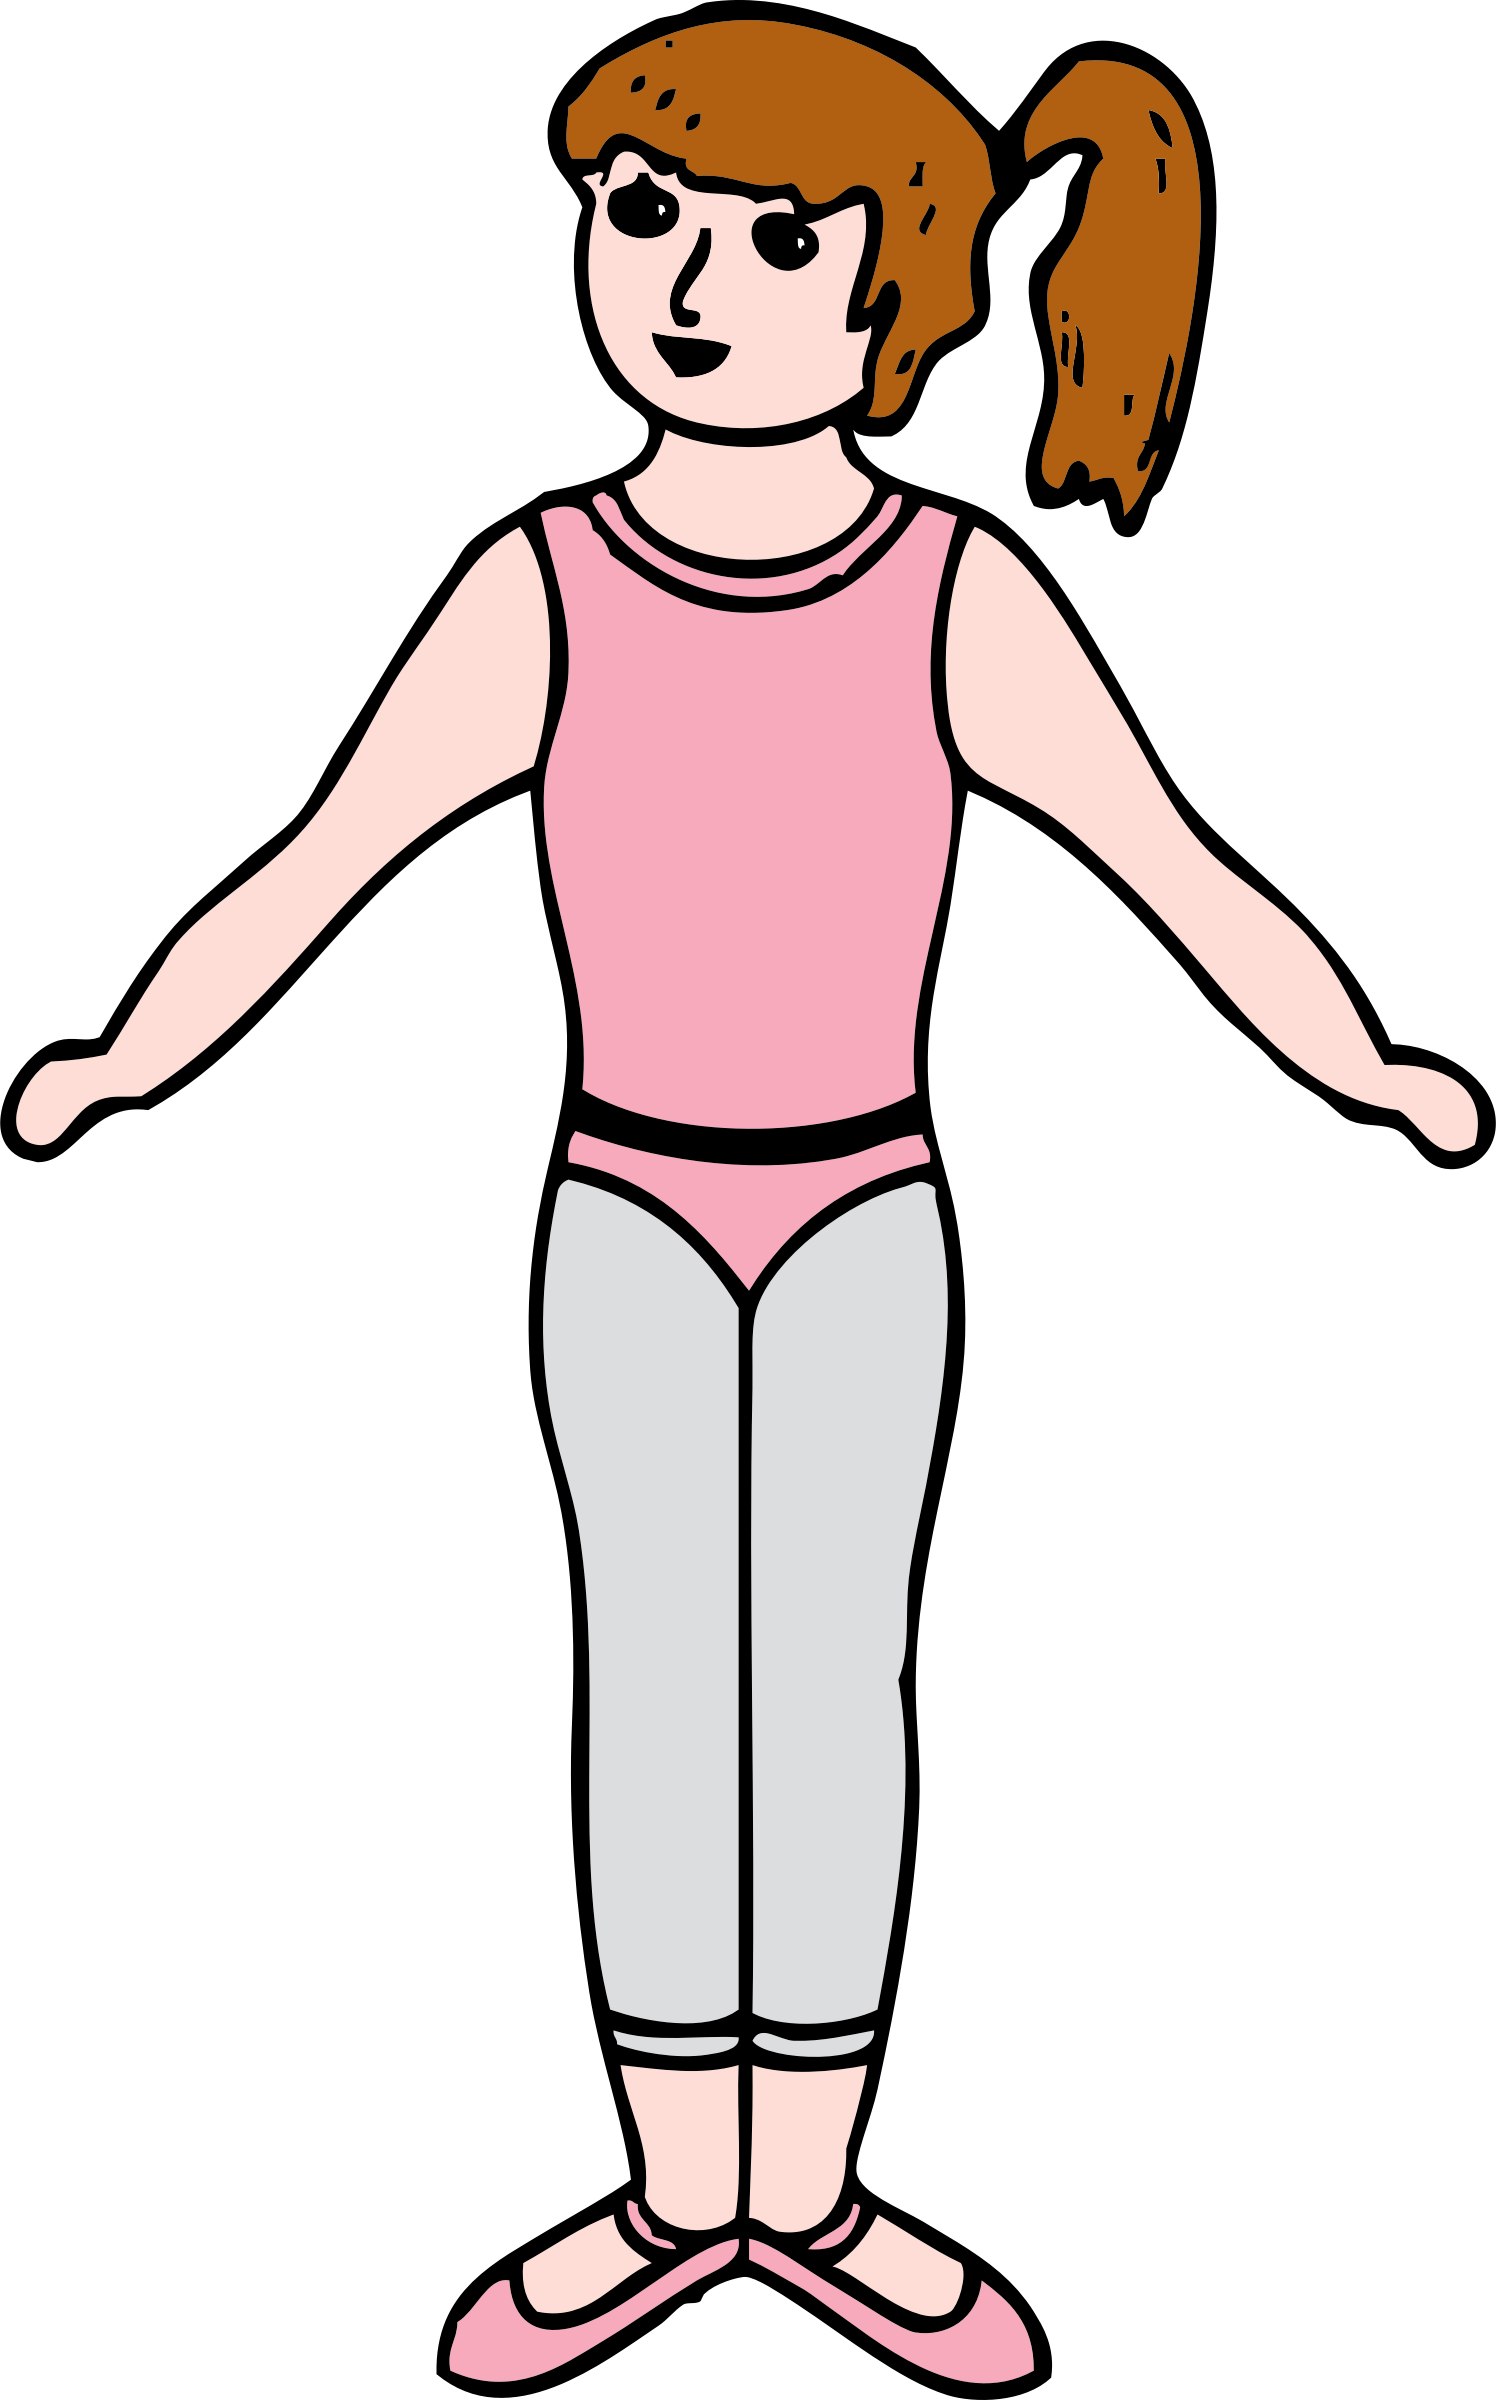 Free Cartoon Body Png, Download Free Cartoon Body Png png images, Free